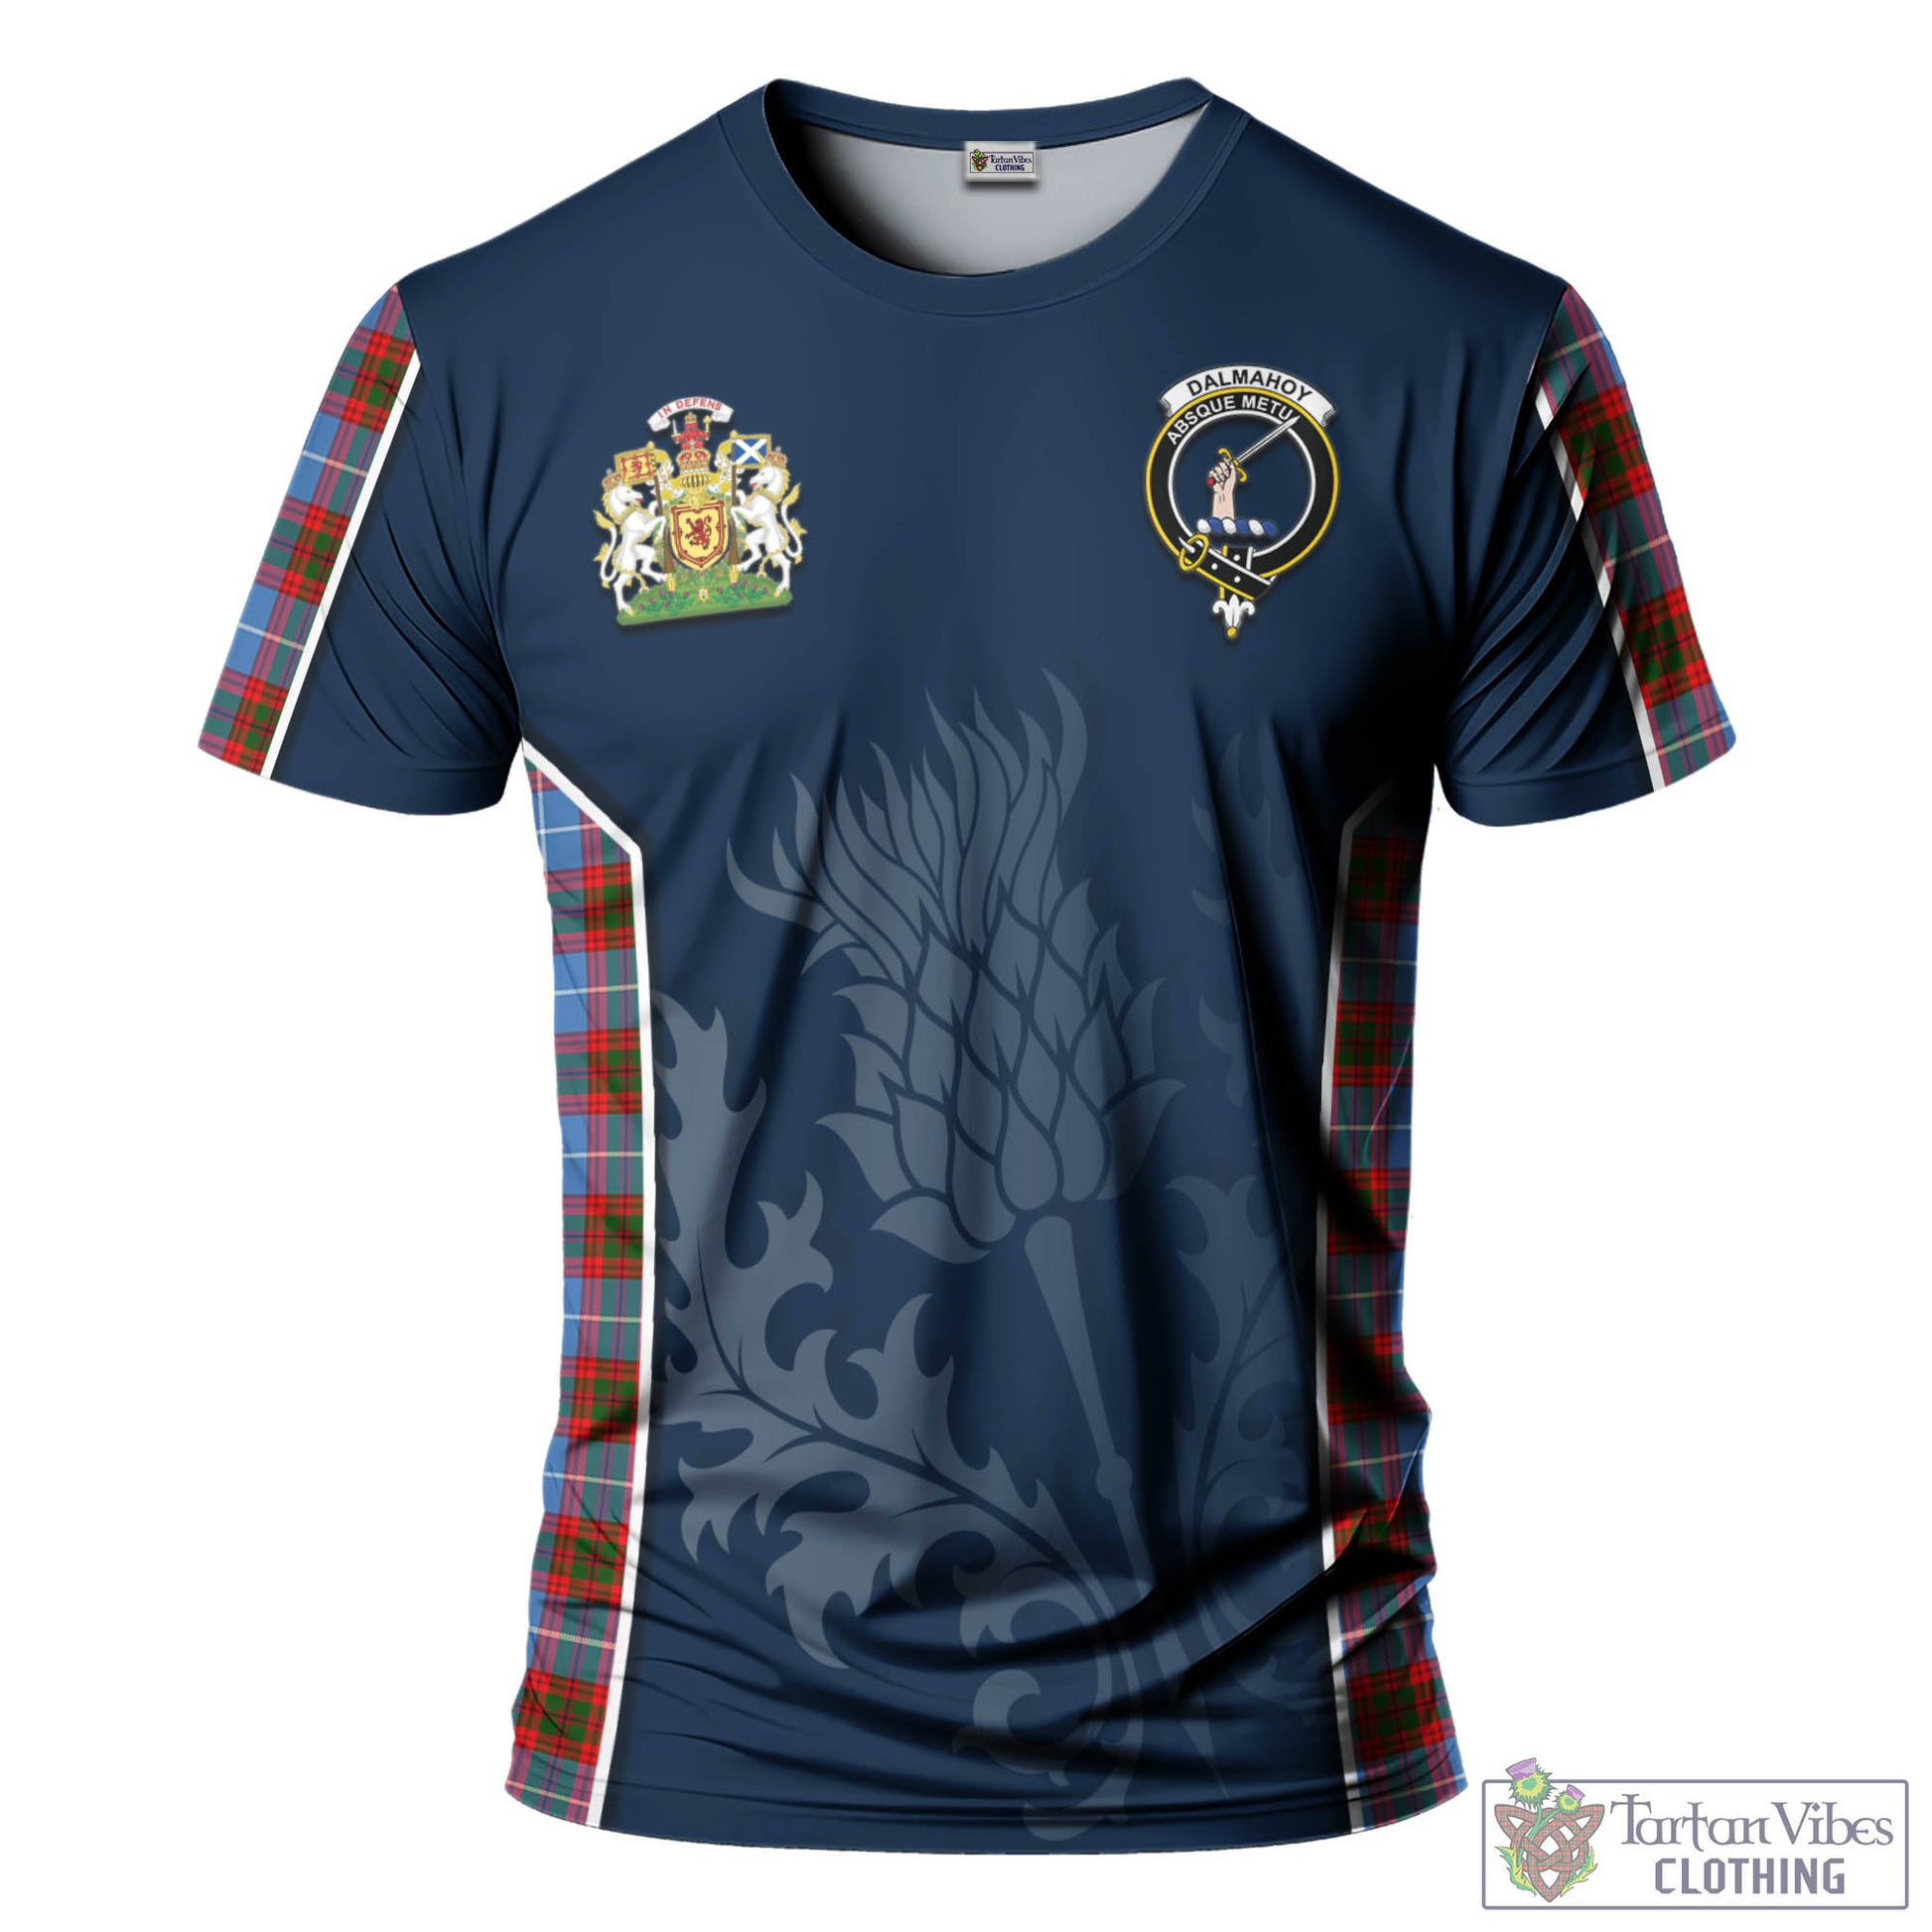 Tartan Vibes Clothing Dalmahoy Tartan T-Shirt with Family Crest and Scottish Thistle Vibes Sport Style